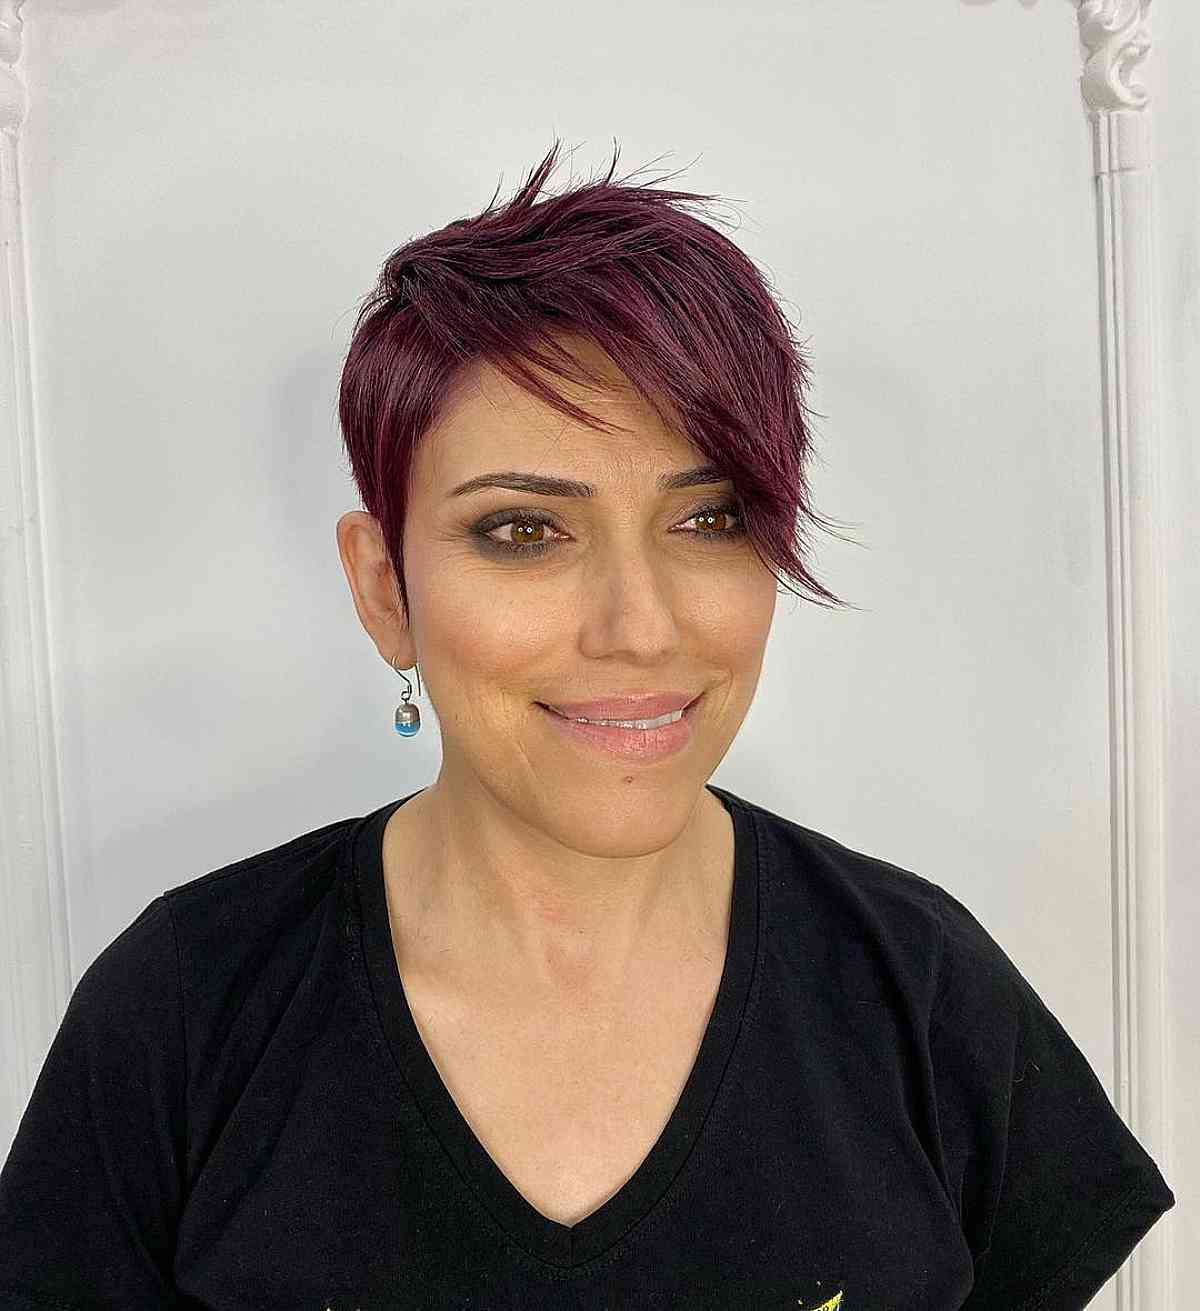 Plum Pixie Cut with Side Bangs